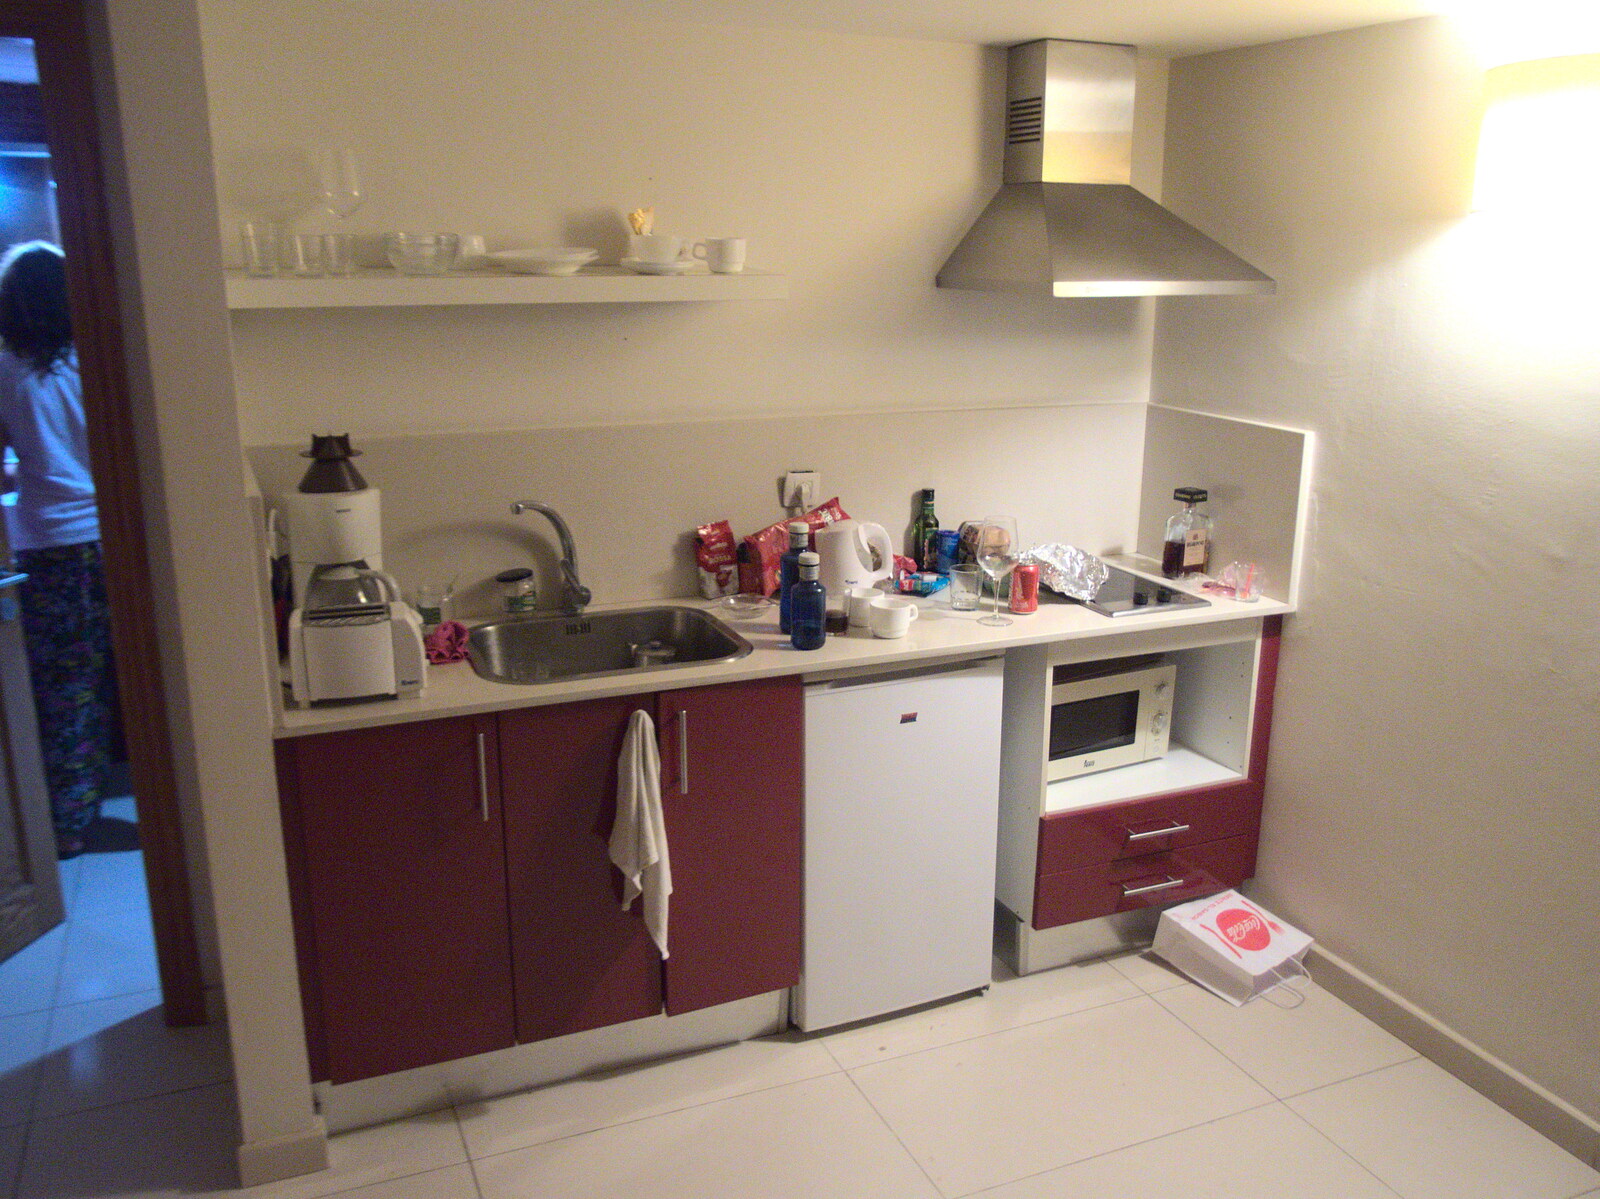 Our 'fully equipped' kitchen from The Volcanoes of Lanzarote, Canary Islands, Spain - 27th October 2021